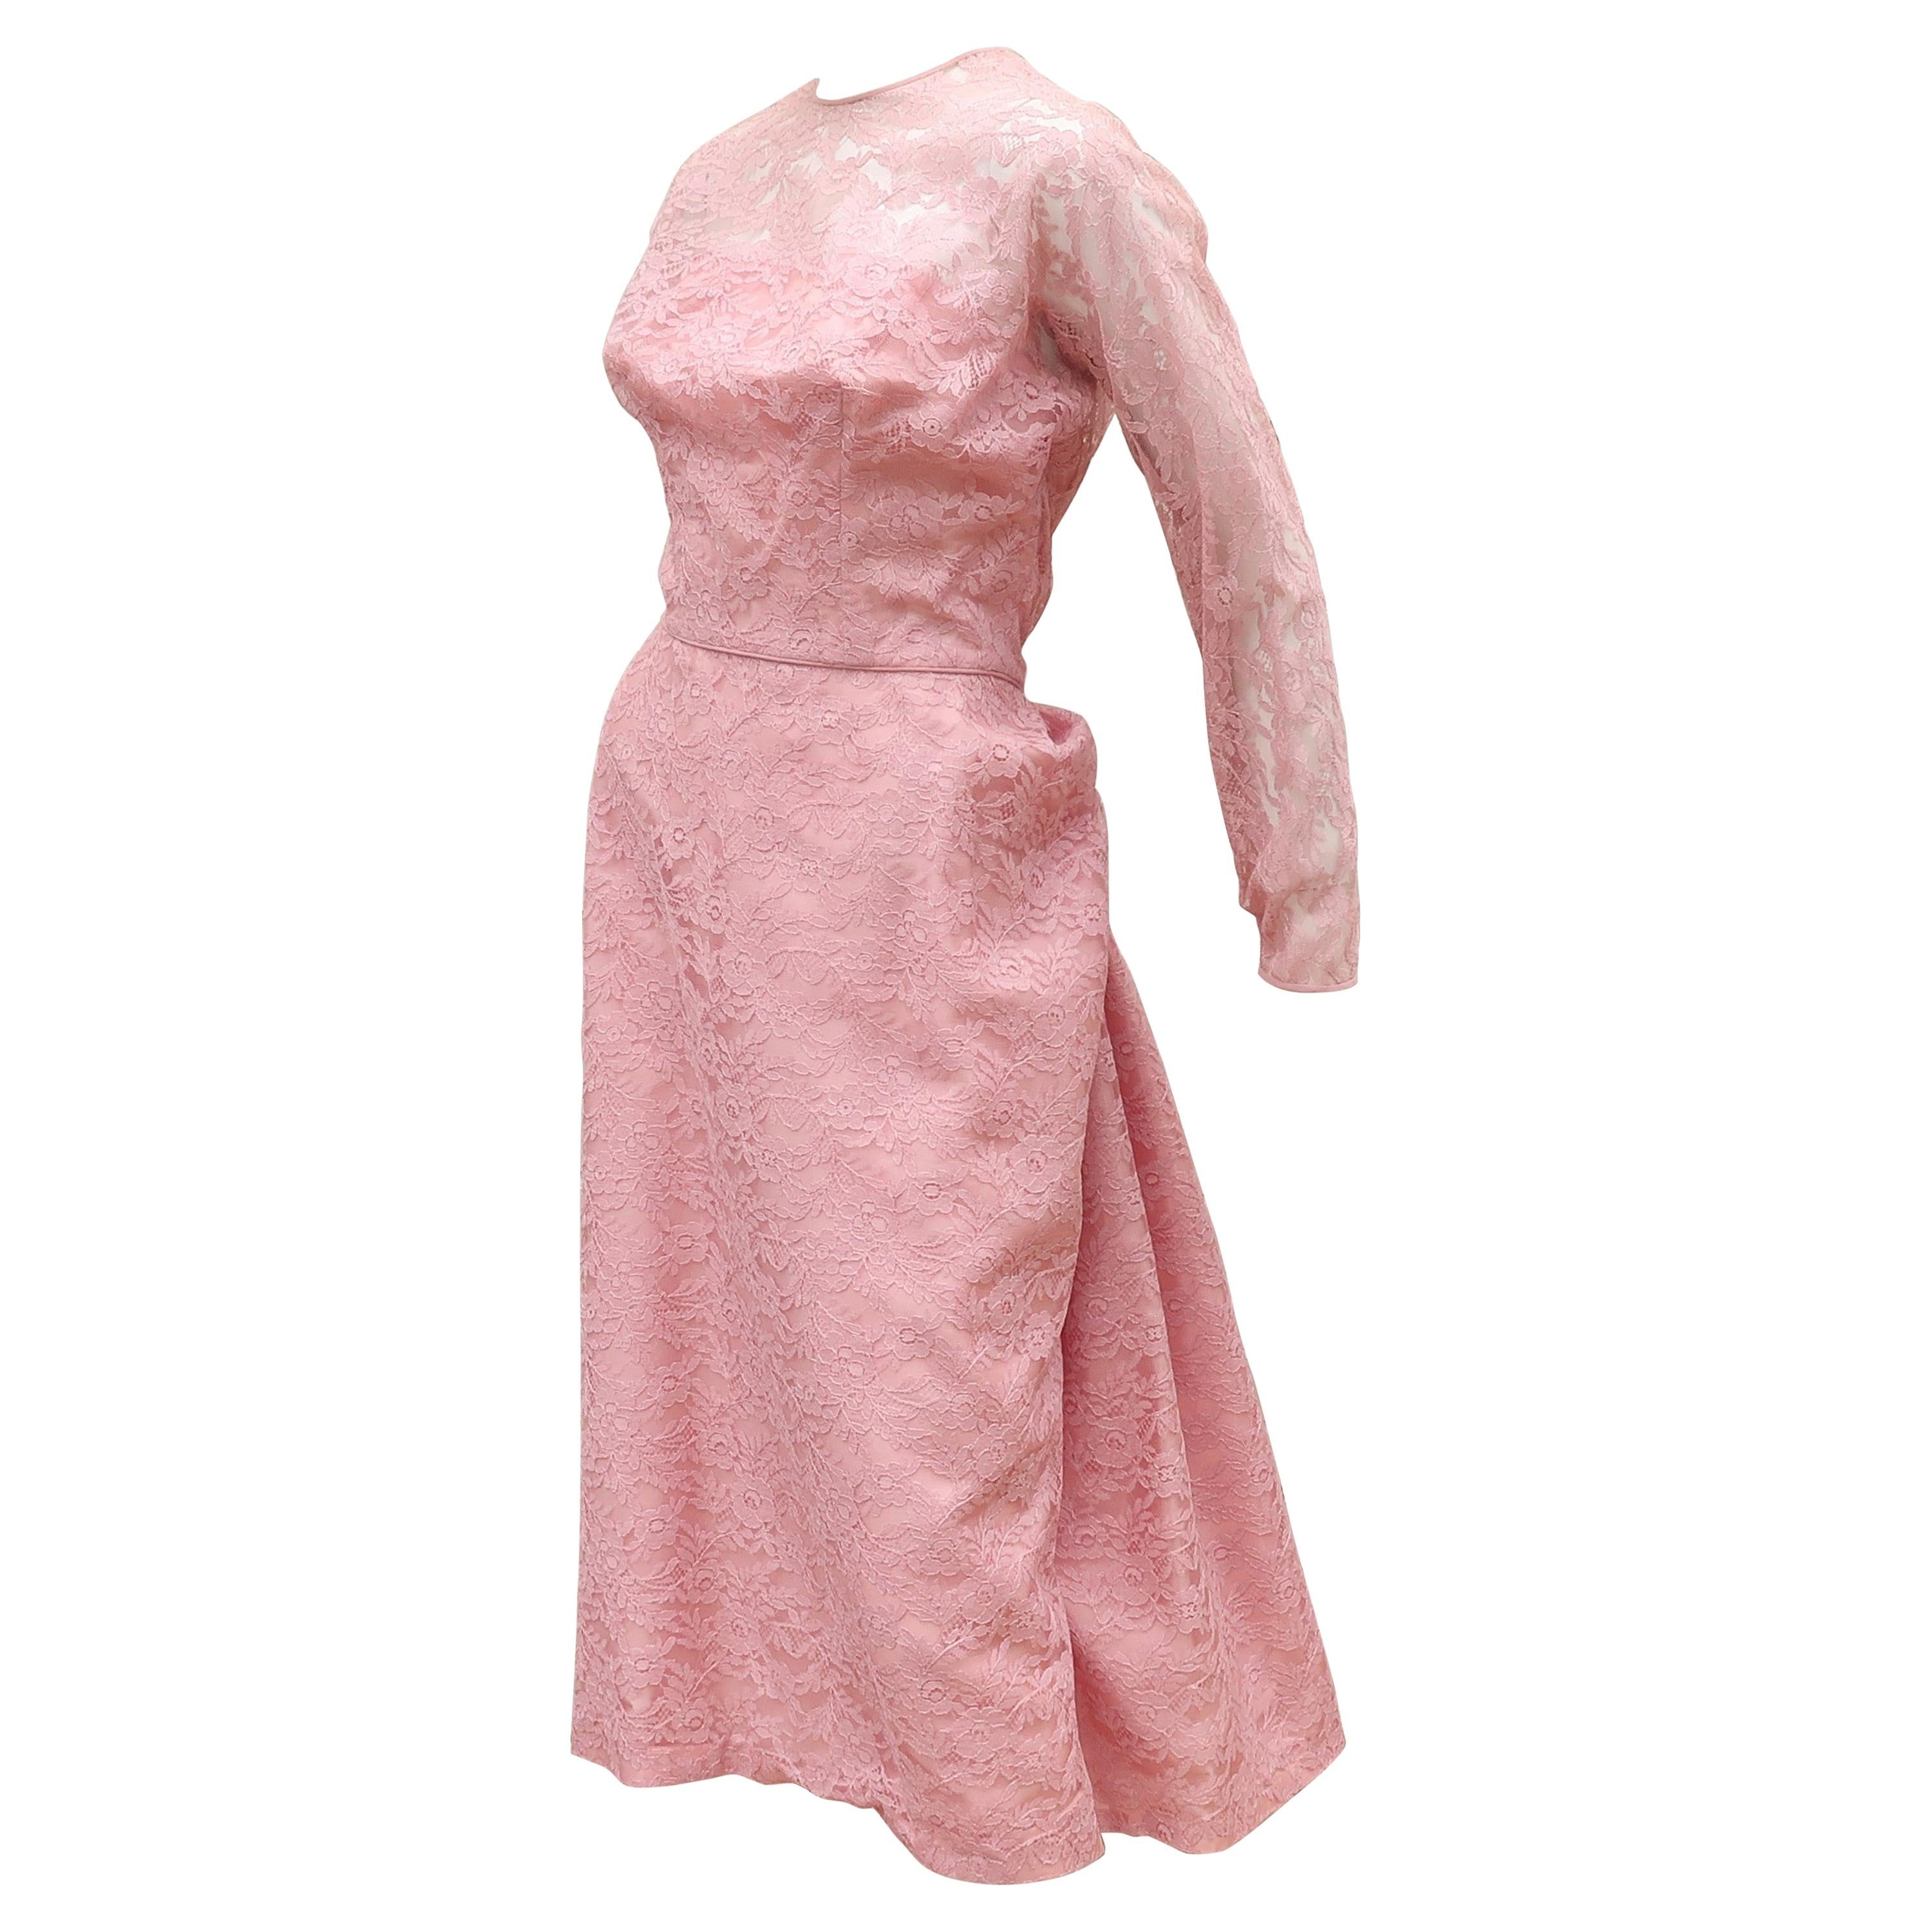 Lee Claire Pink Lace Cocktail Dress, 1950's